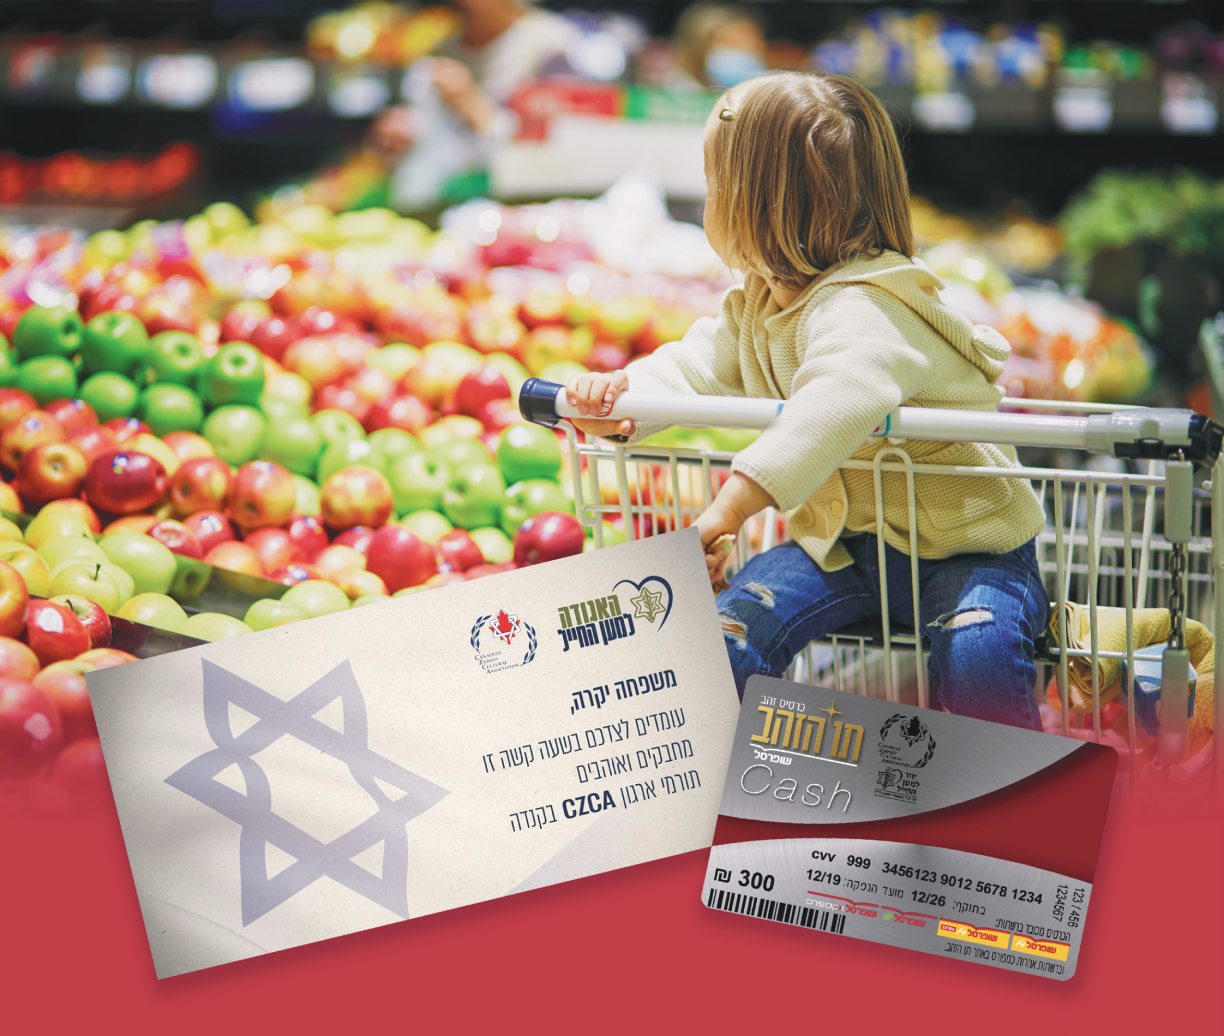 Recreational and rehabilitation programs for bereaved families of fallen IDF soldiers and food vouchers for families of IDF soldiers in financial need